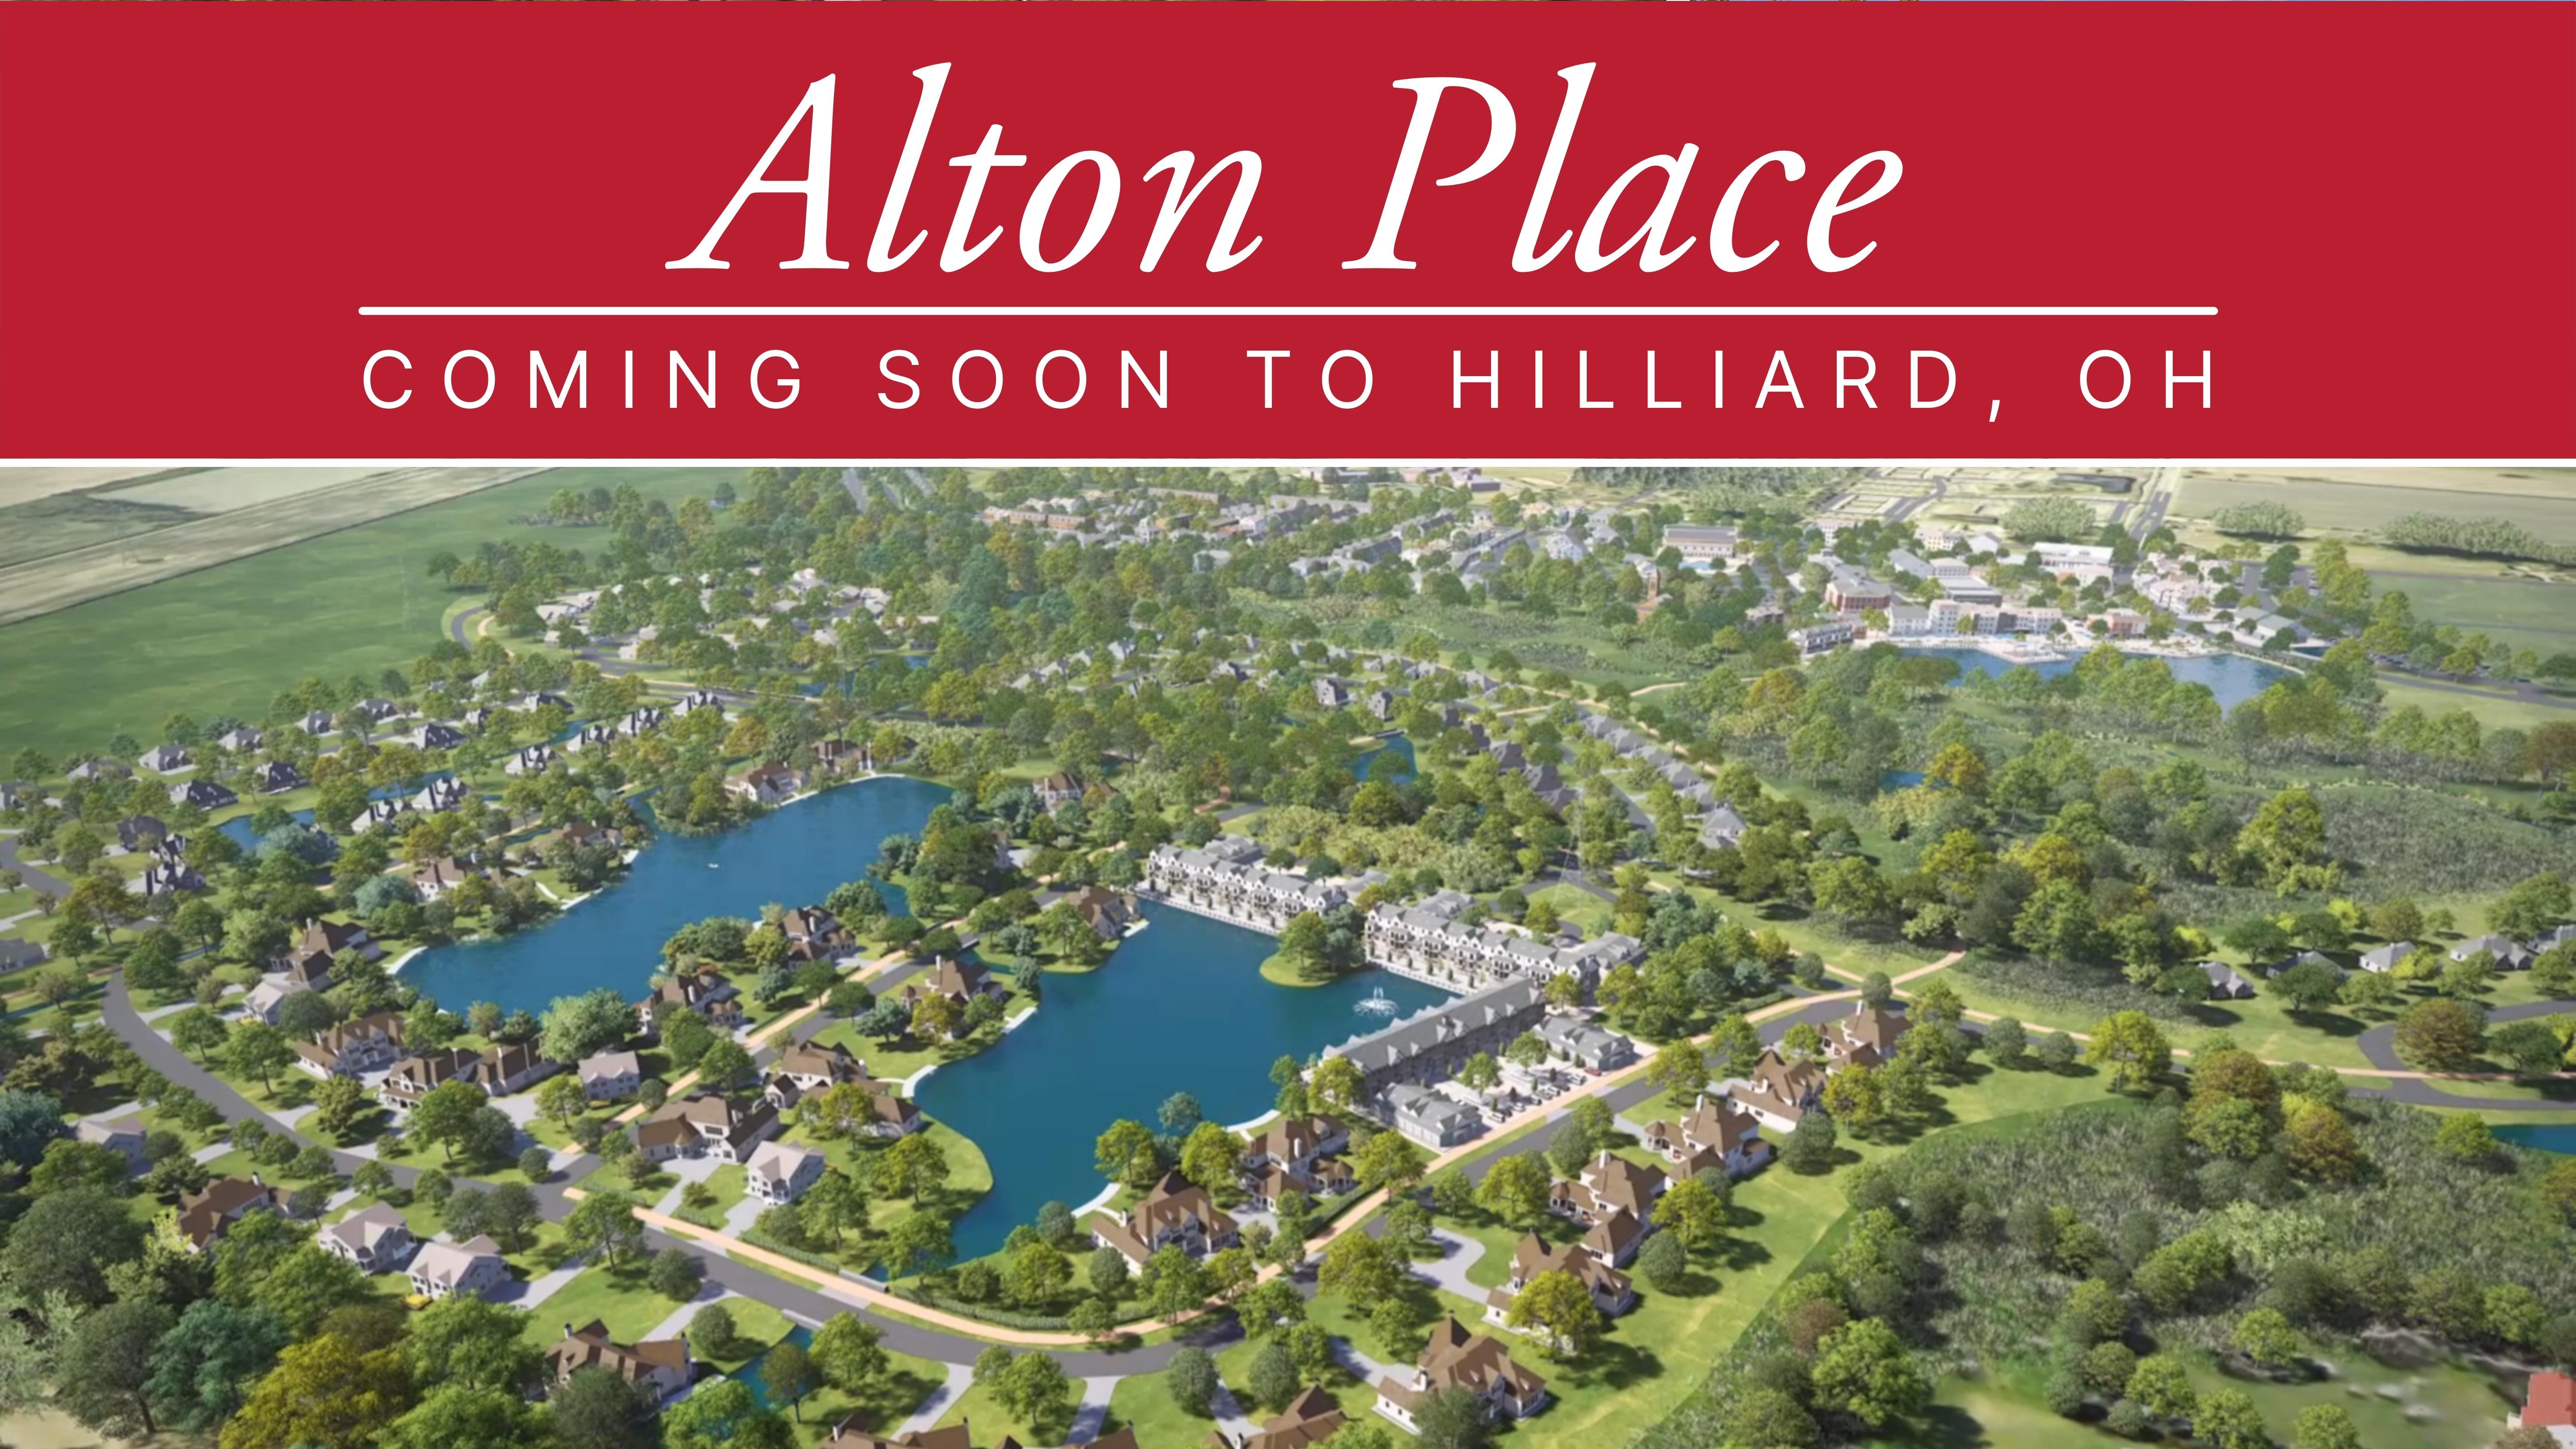 New Homes Coming Soon to Hilliard, OH!